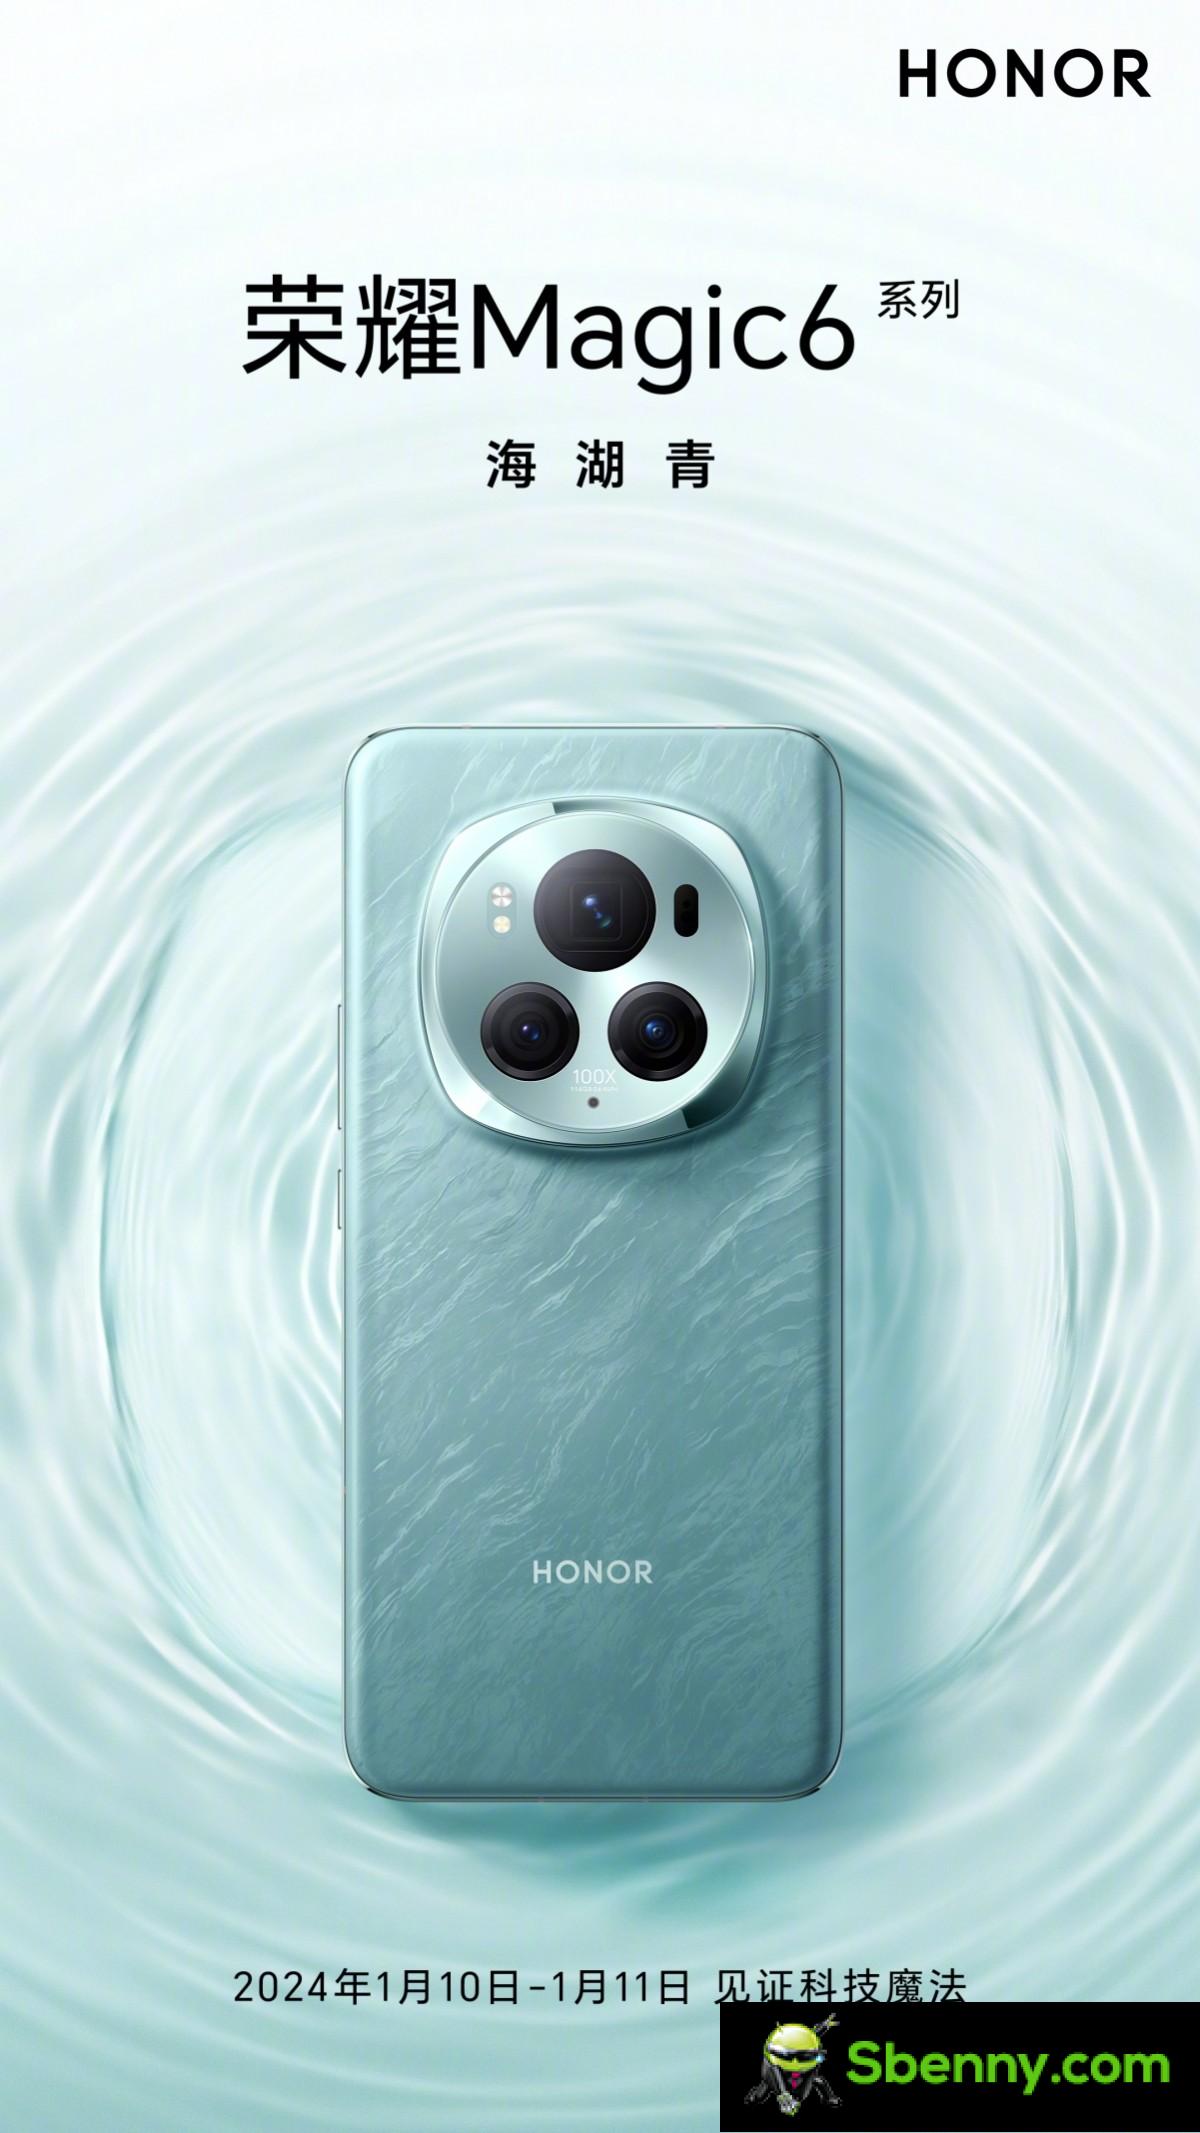 The design of the Honor Magic6 Pro has been revealed ahead of its January 10 launch